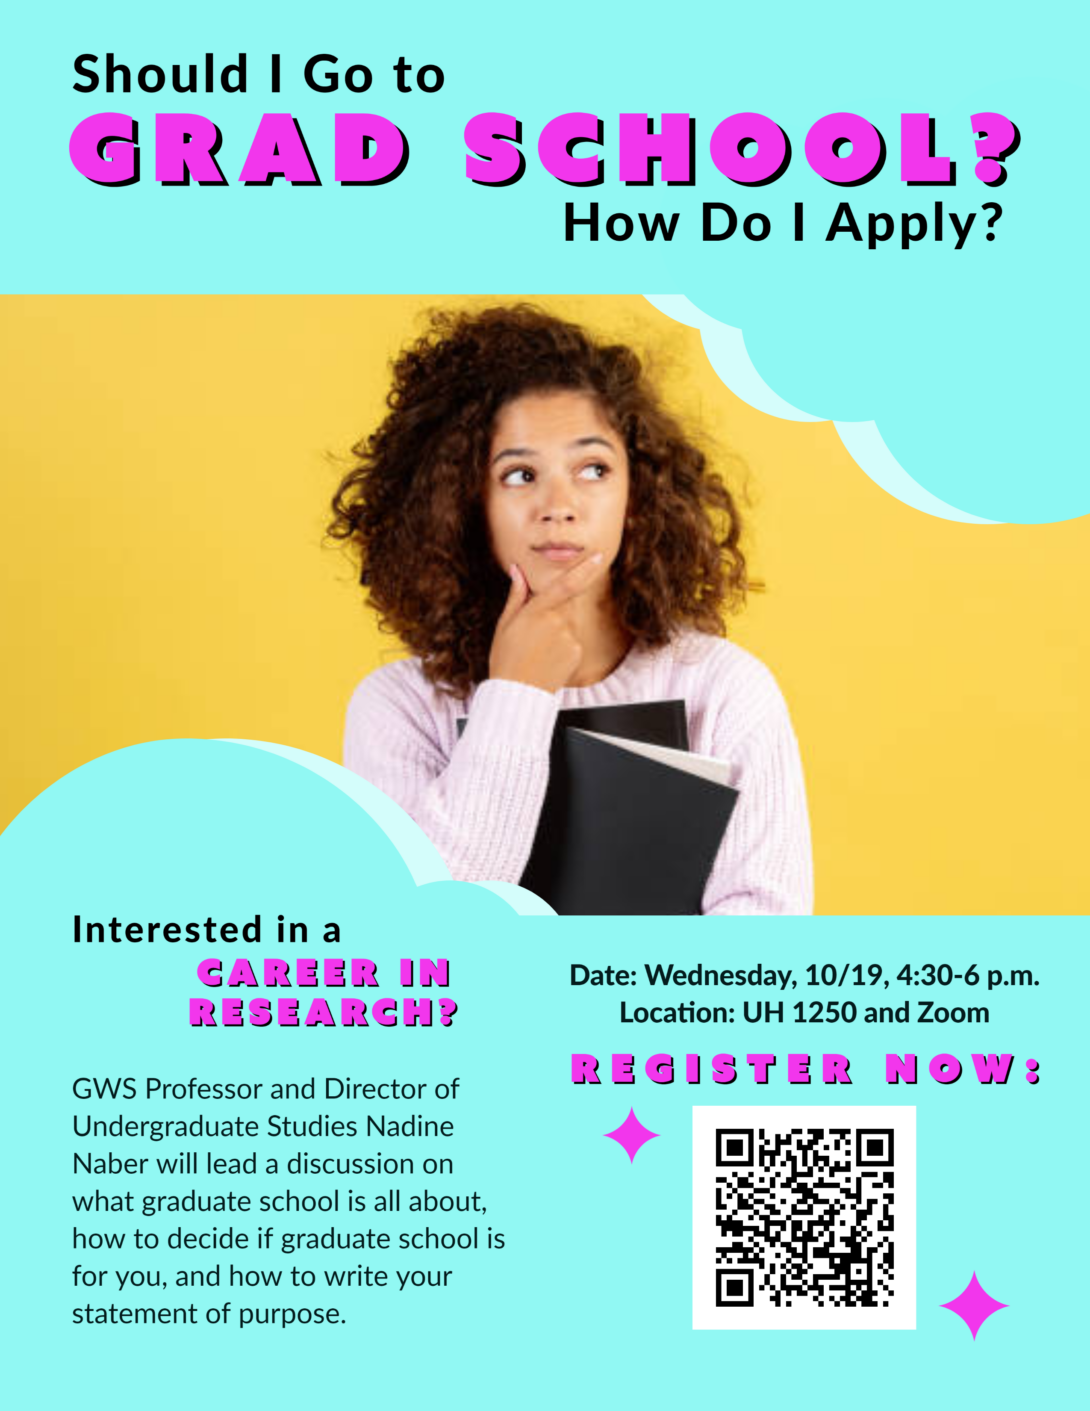 Flier with a yellow center, teal top, teal bottom. A confused looking young woman student with shoulder-length curly hair, wearing a white sweatshirt, and holding two books is in the center of the flier. Black and pink text provides an event description and registration details.